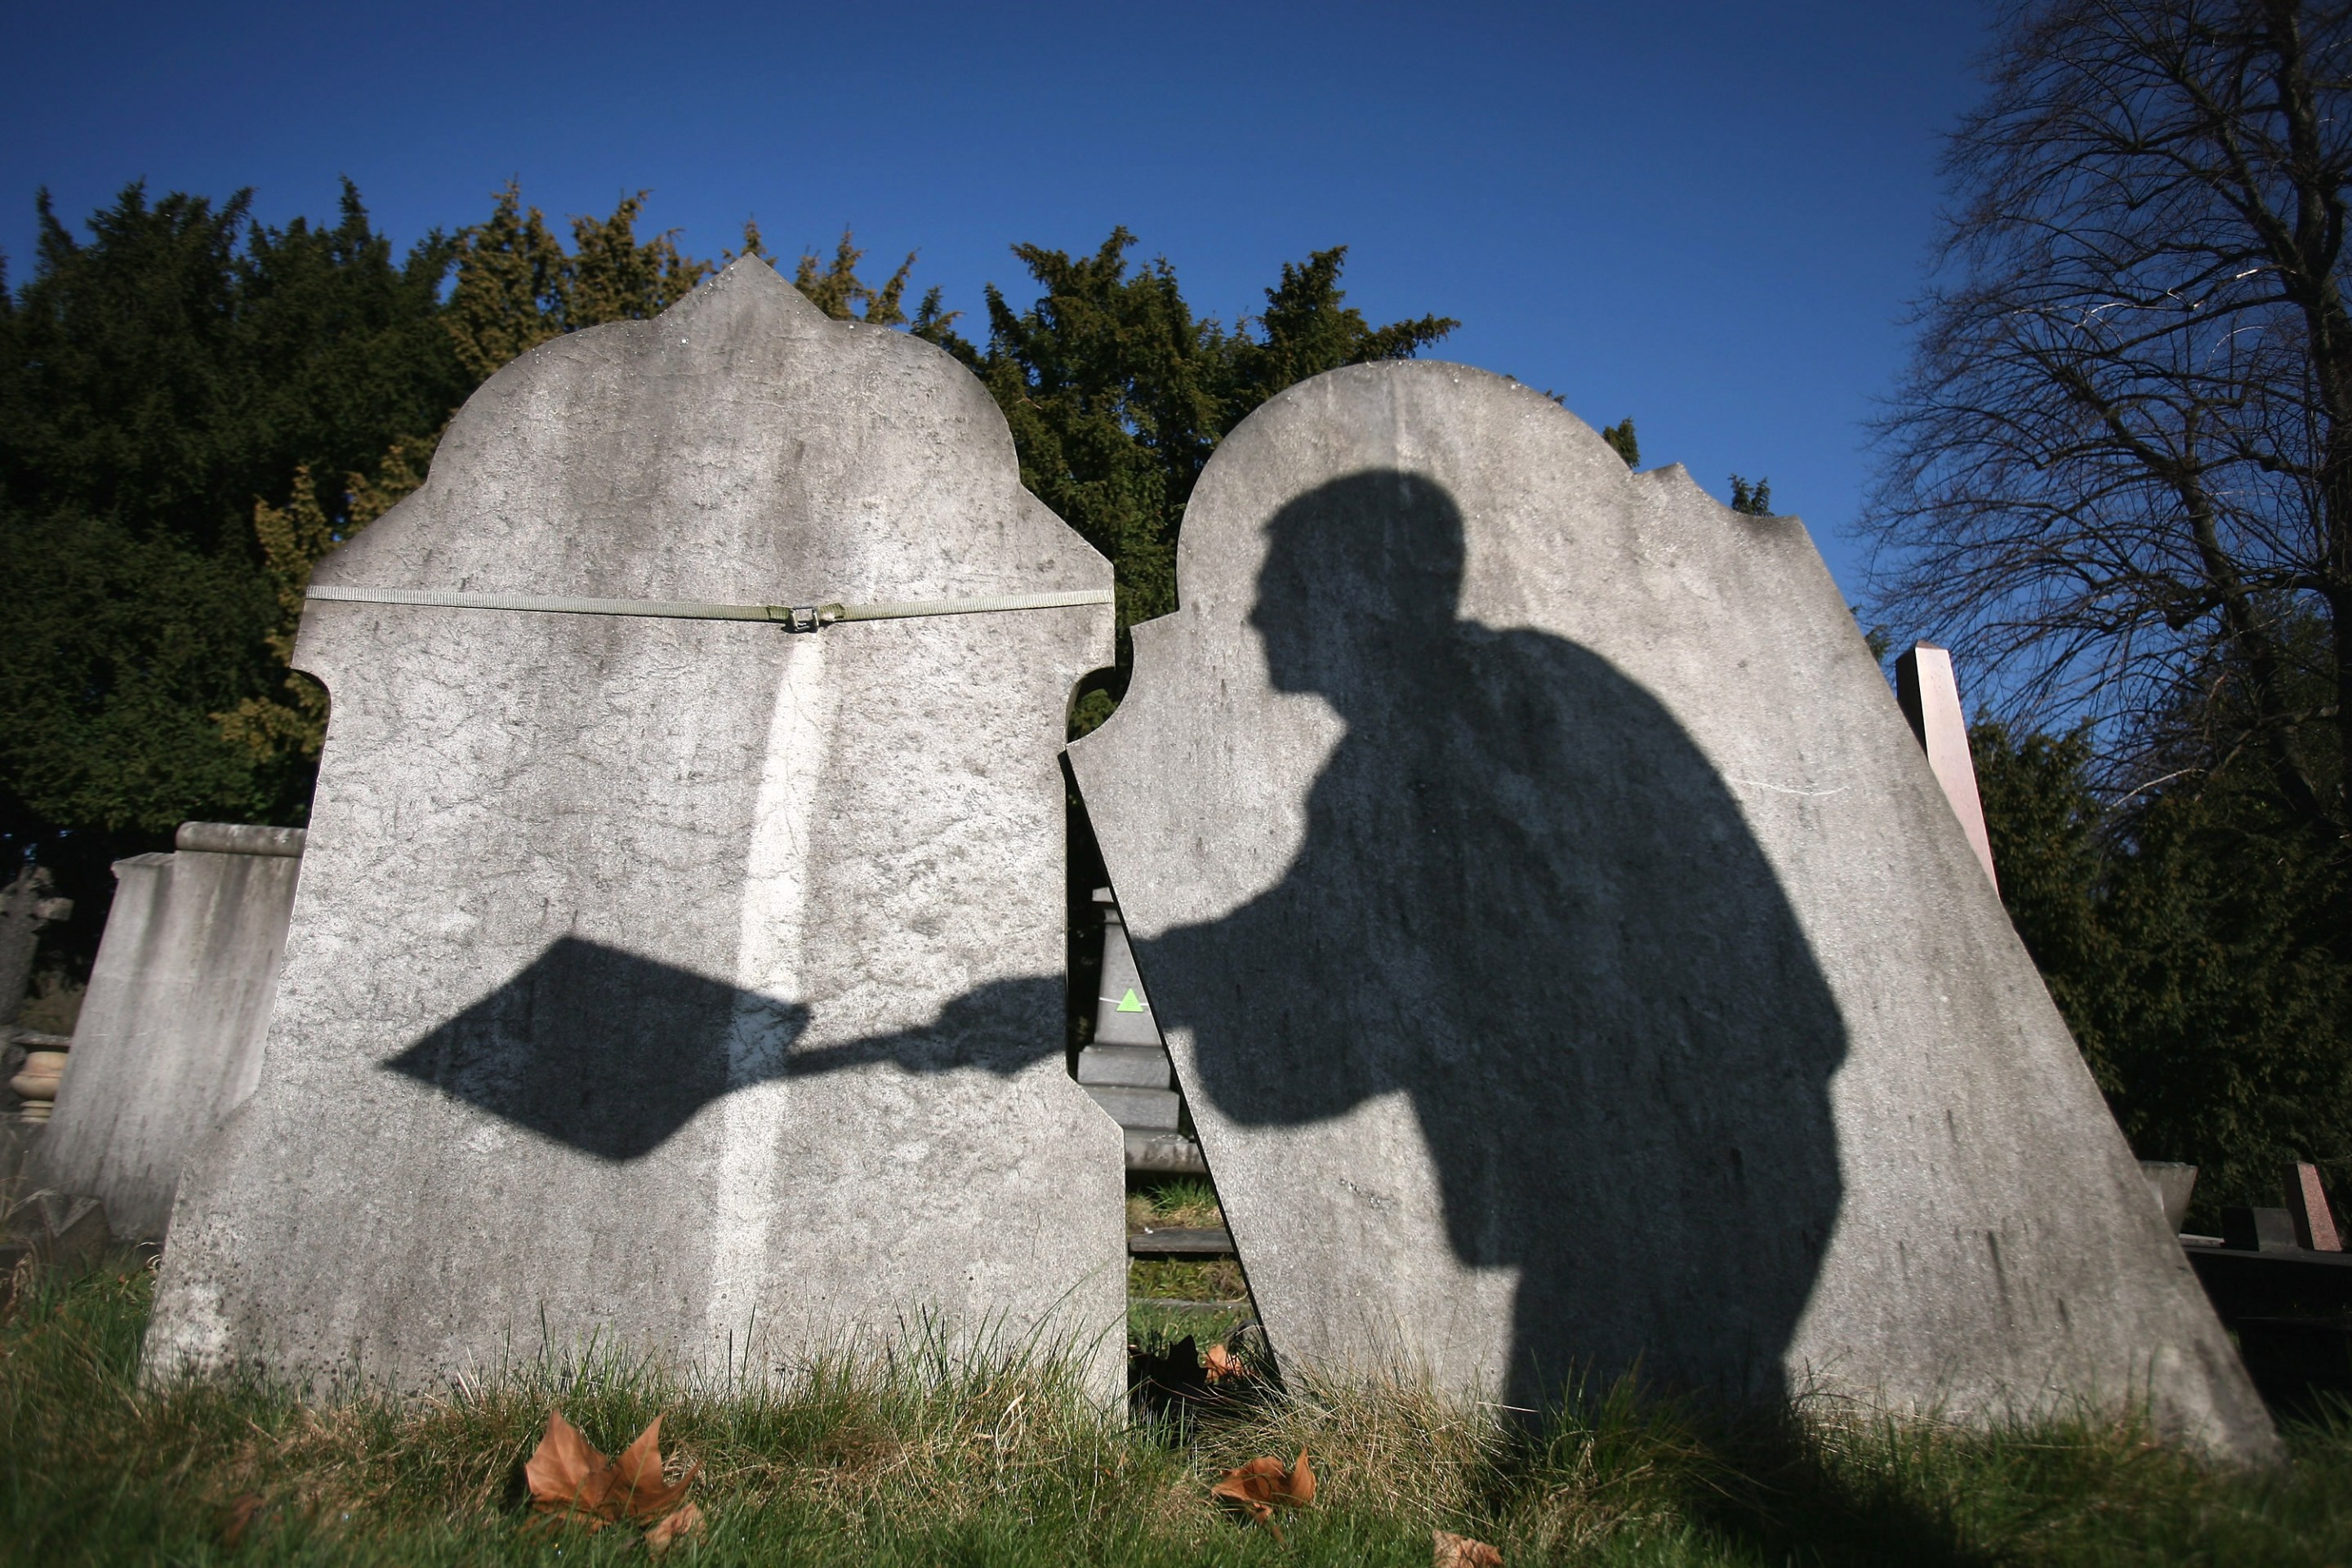 LONDON, ENGLAND - MARCH 02: The shadow of a cemetery worker is cast on reclaimed gravestones in London City Cemetery on March 2, 2009 in London, England. The cemetery is piloting a scheme whereby graves over 75 years old become eligible for reclamation. New interments will be placed into the existing graves, the headstones will be turned around and re-used, carving the names of the newly deceased. Once a grave has been earmarked by English heritage the cemetery must wait one year to see if family members claim the existing grave. By conserving as many memorials as possible the City of London hopes to maintain the historic cemetery landscape and sustain buriel provisions for the future. (Photo by Dan Kitwood/Getty Images)